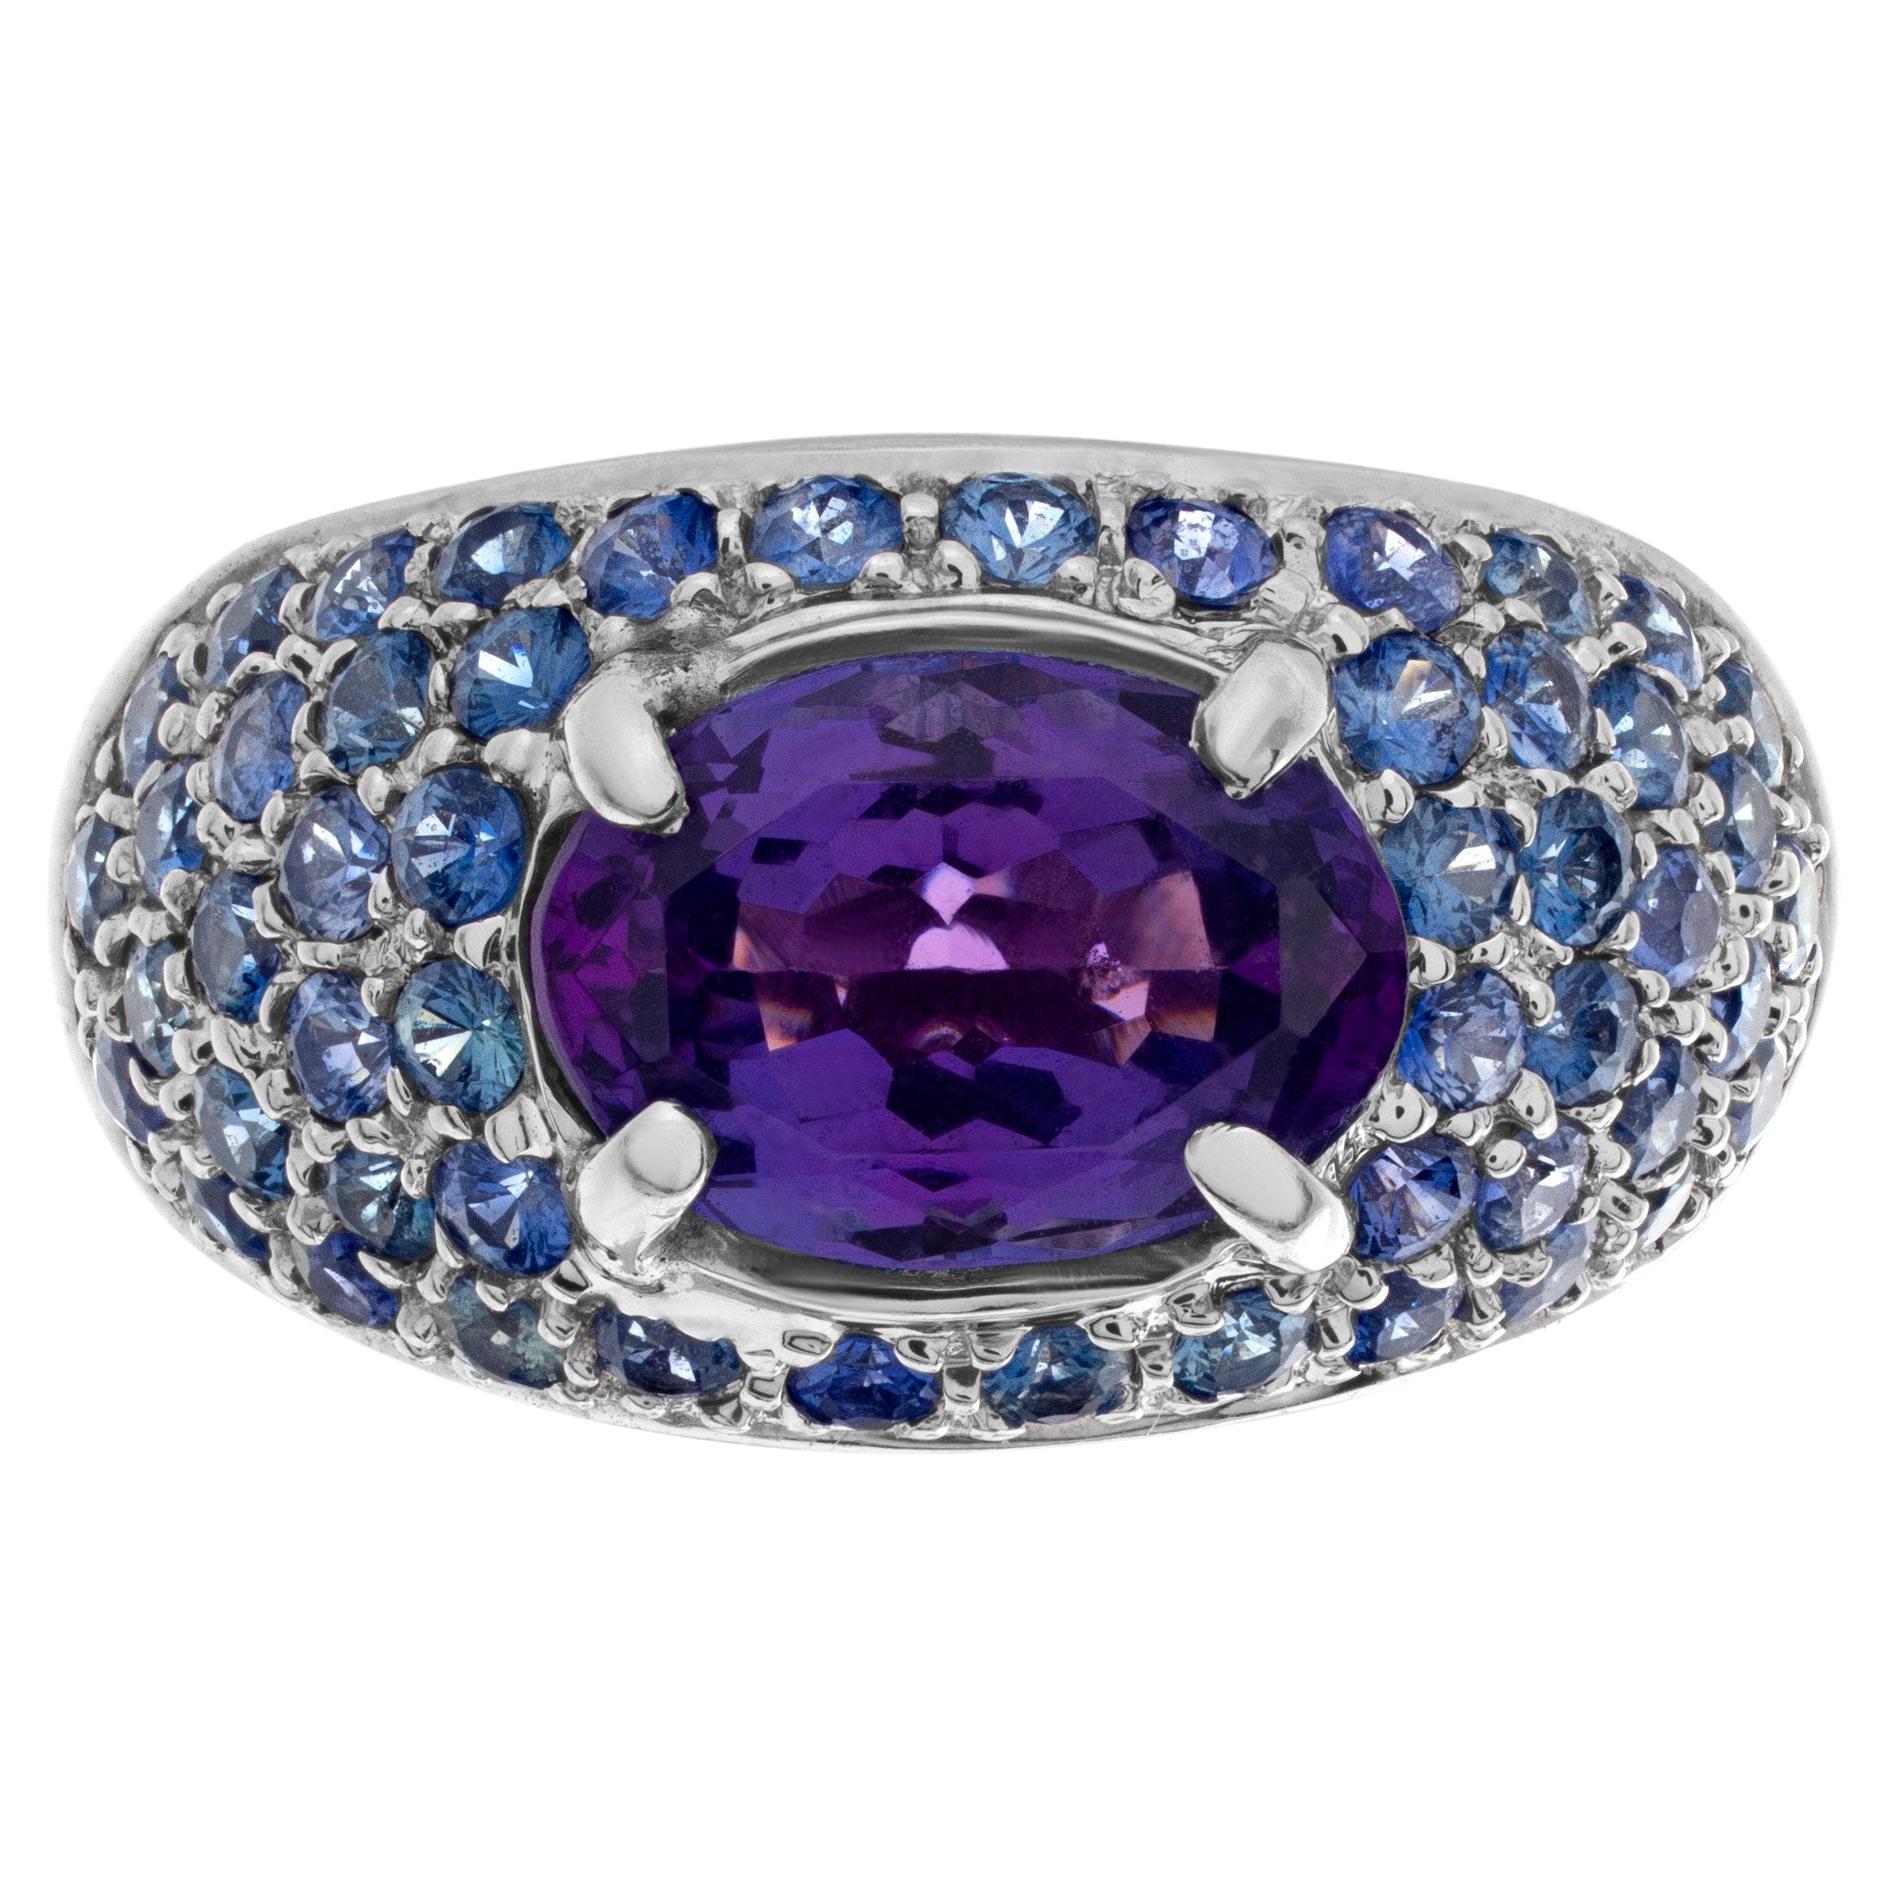 Bright Oval Center 'Approximately 2 Carats' Tanzanite Surrounded by Sparkling Pa For Sale